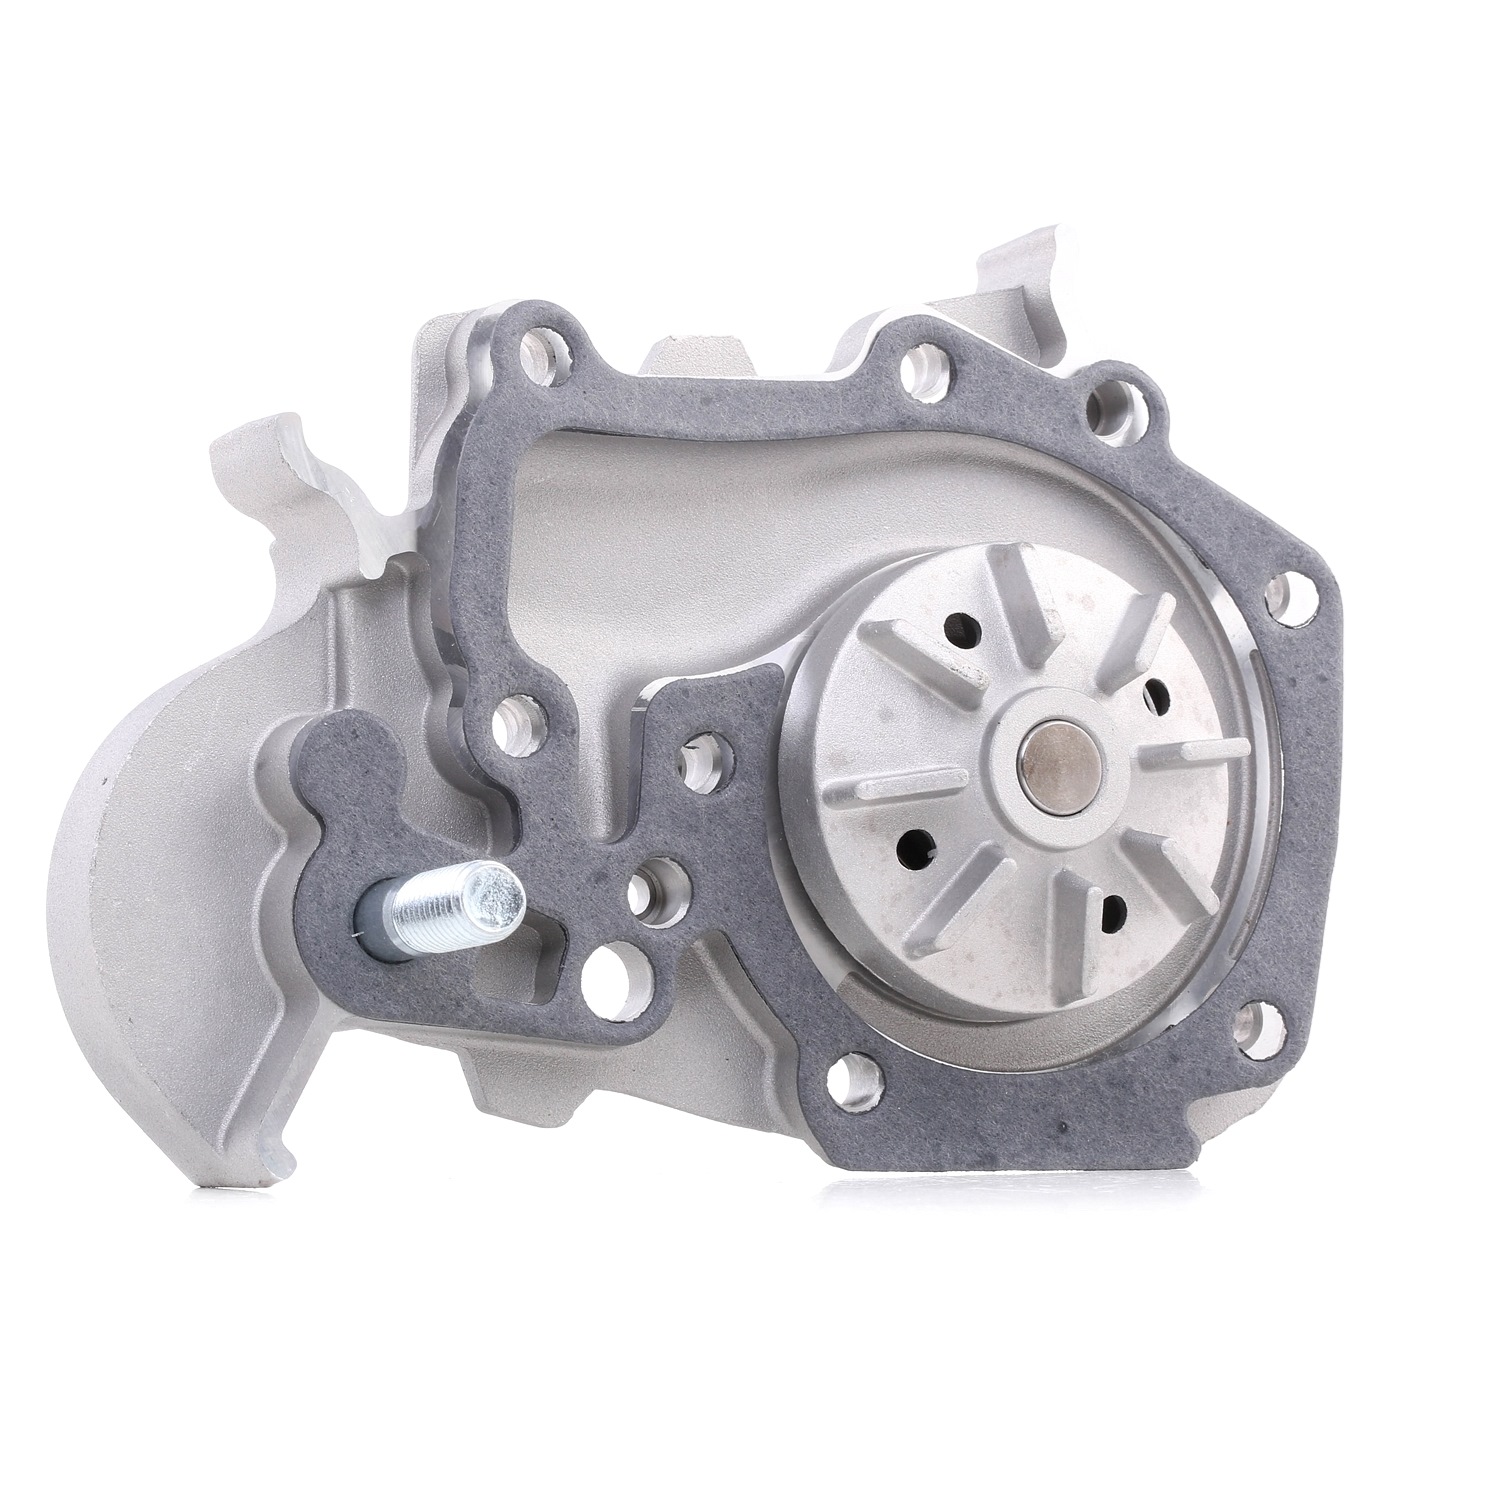 STARK SKWP-0520184 Water pump Number of Teeth: 20, Cast Aluminium, with belt pulley, with seal, Mechanical, Metal impeller, Belt Pulley Ø: 59 mm